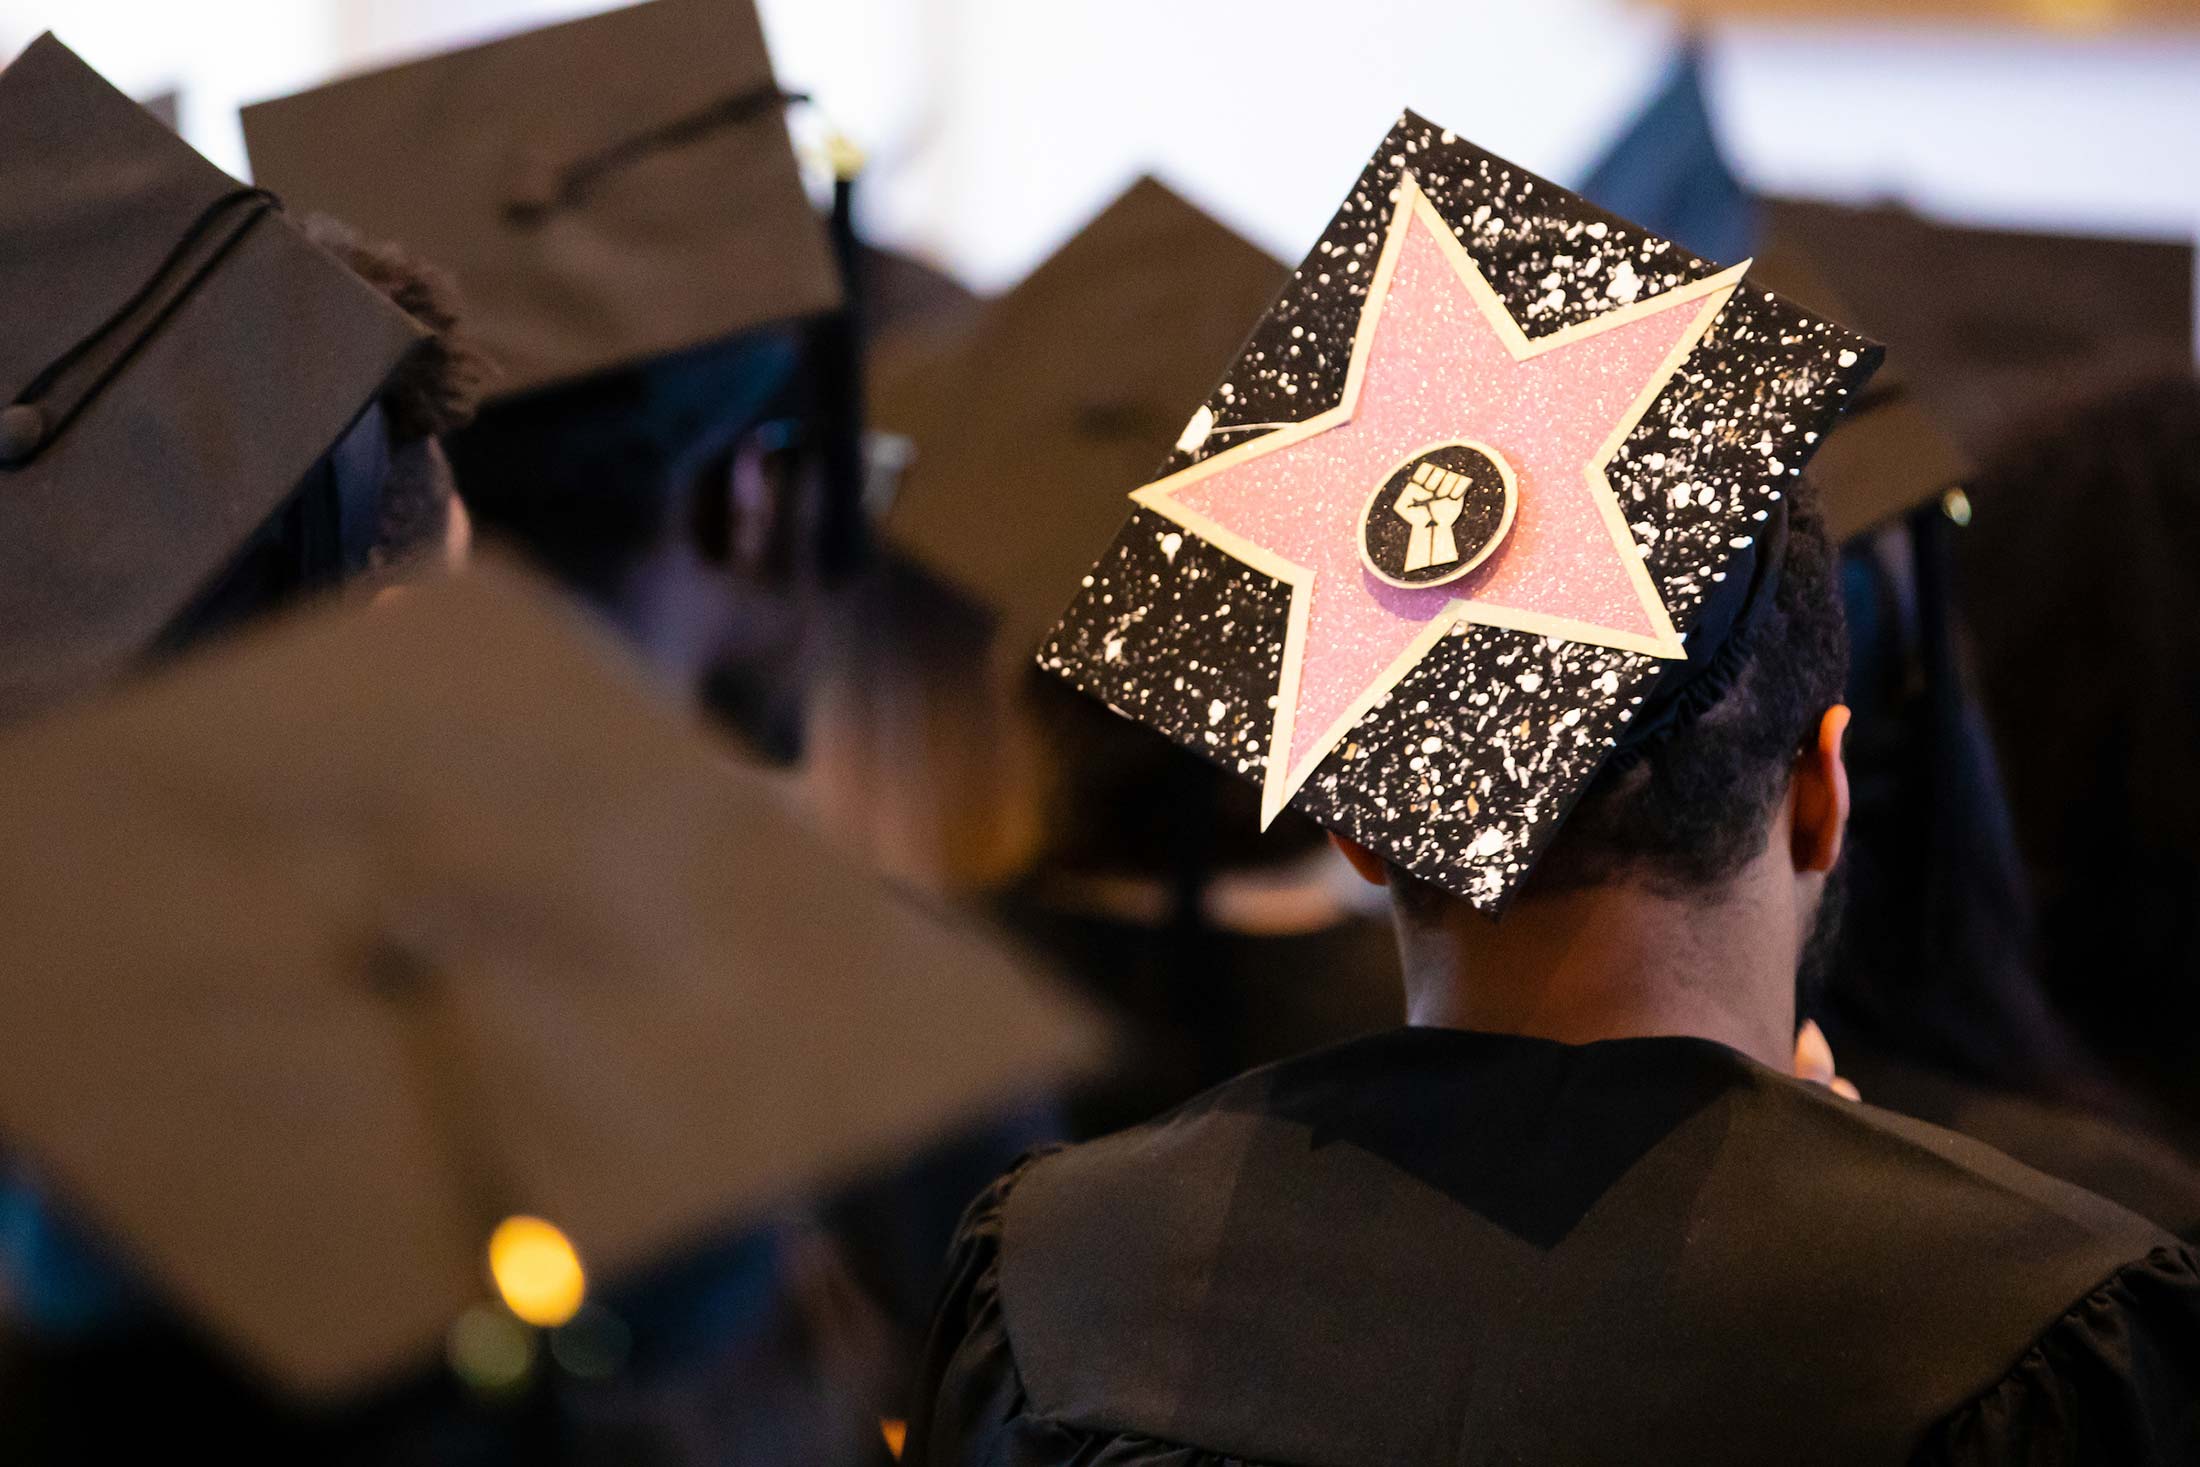 A close-up of a graduation cap decorated with a large pink star and a silhouette of a fisted hand